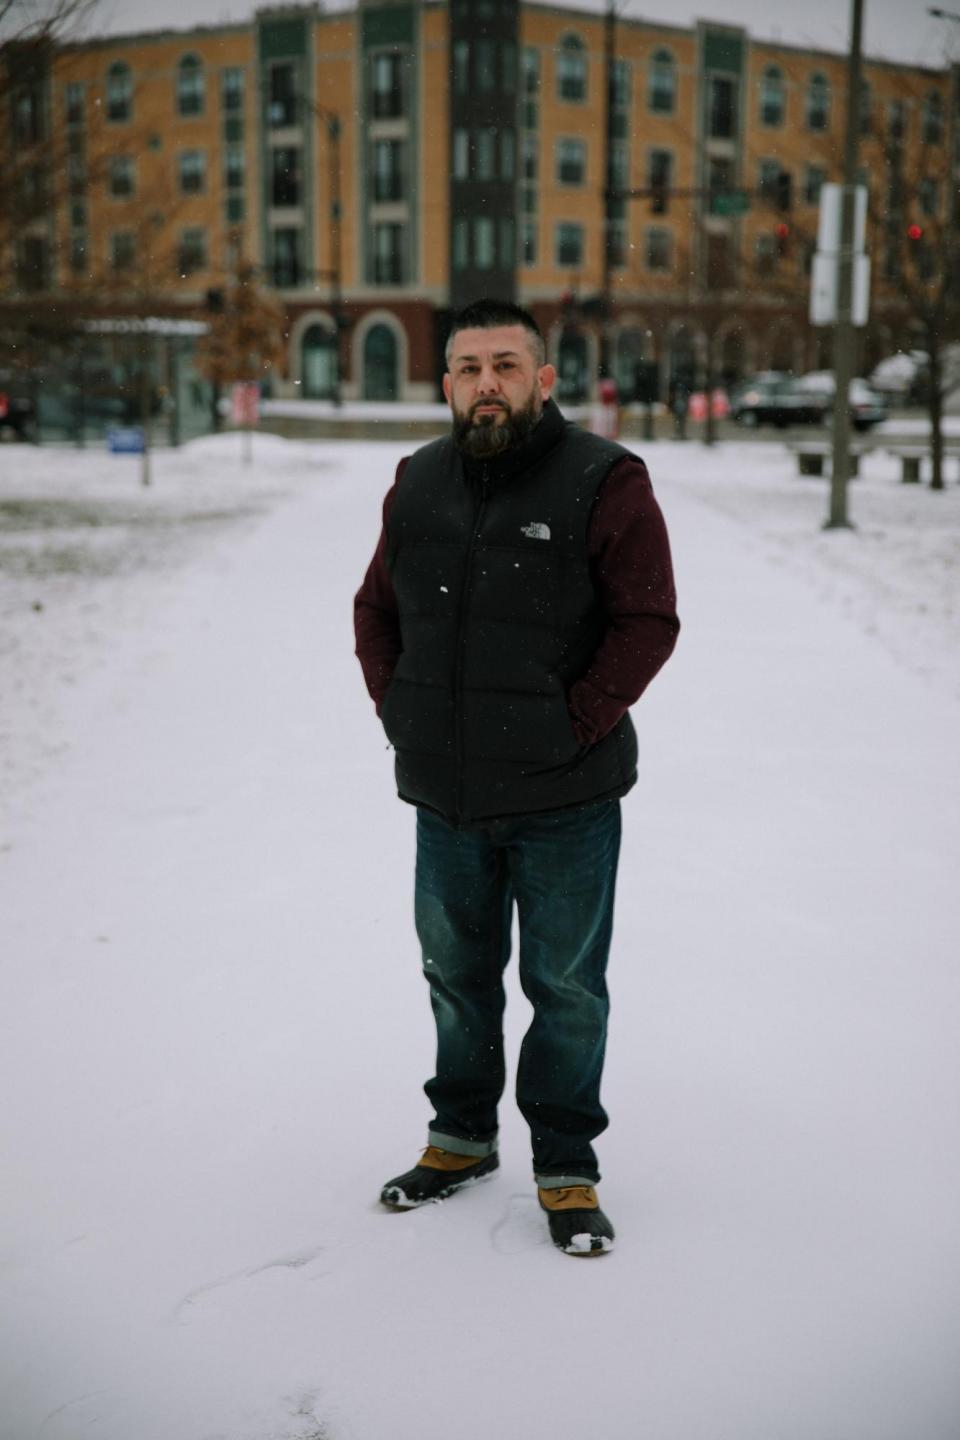 A man stands with his hands in his pockets in the snow.